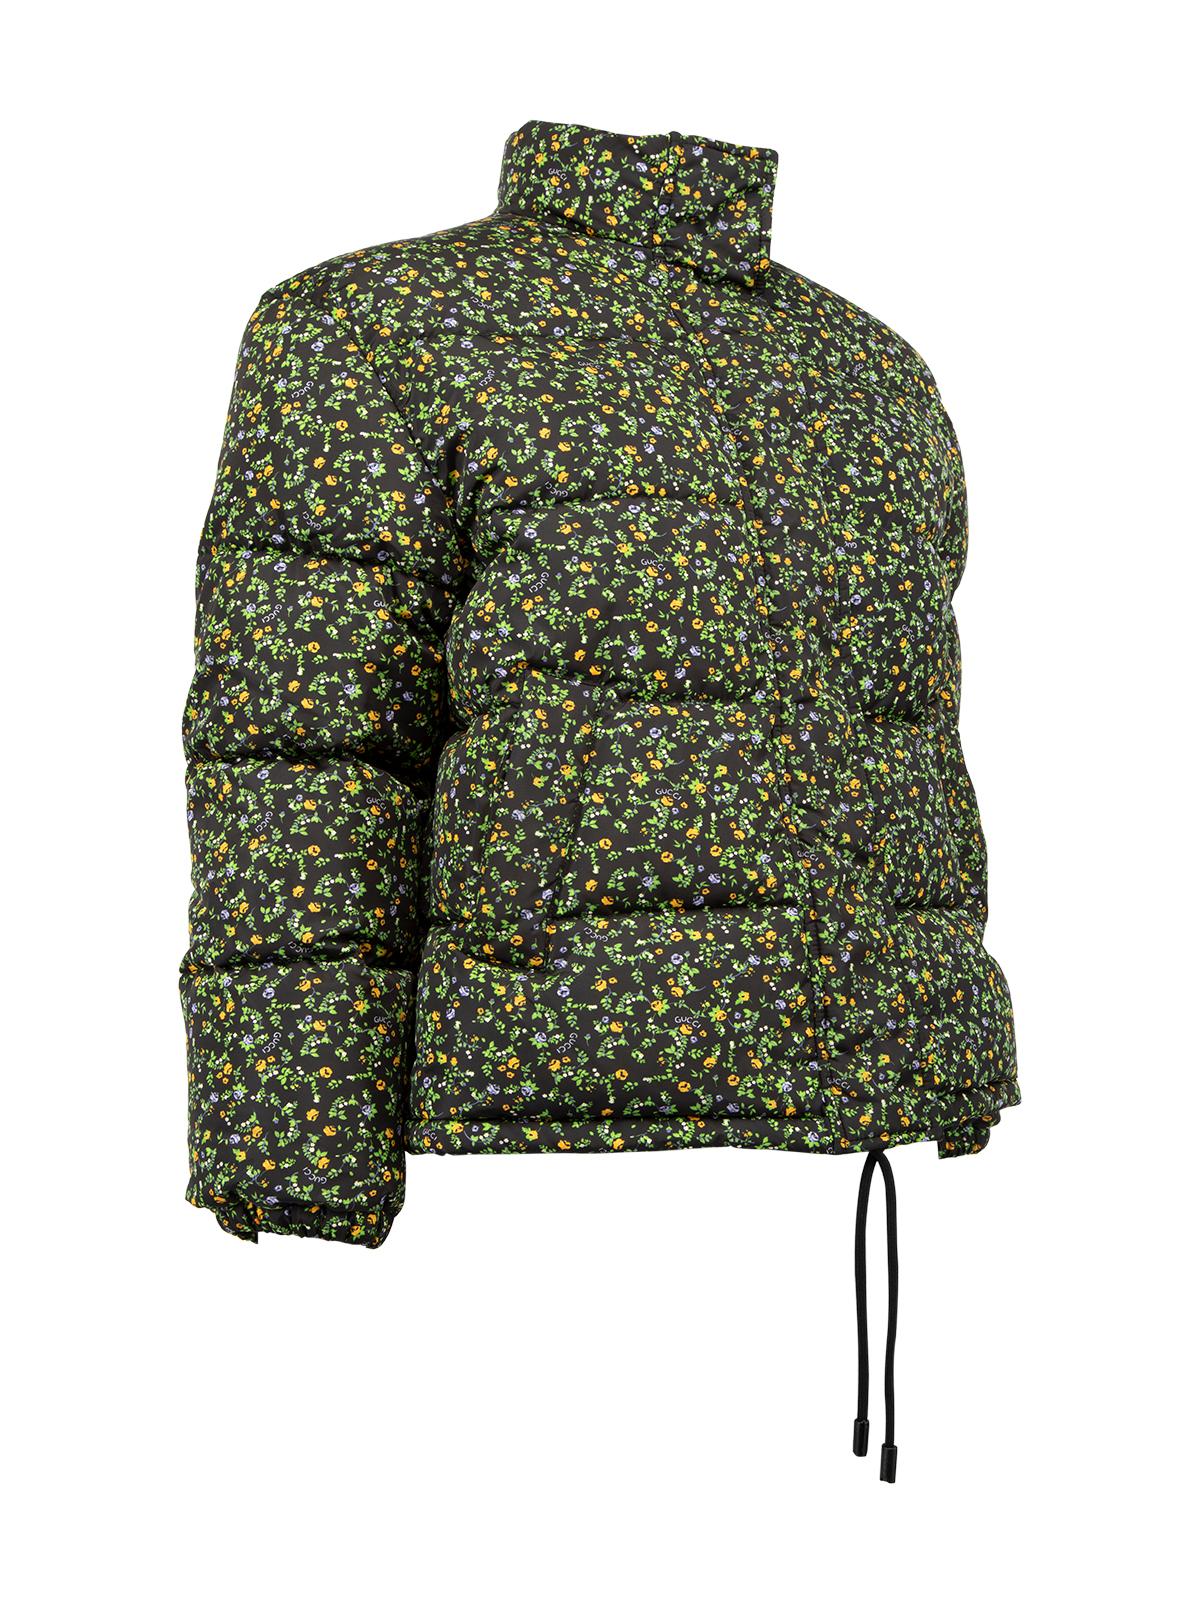 CONDITION is Never Worn. No visible wear to Puffer Jacket is evident on this used Gucci designer resale item. Details Black Multicoloured floral print Polyamide Goose down Puffer Casual Draw string hemline Zip and press stud closure Material Gucci